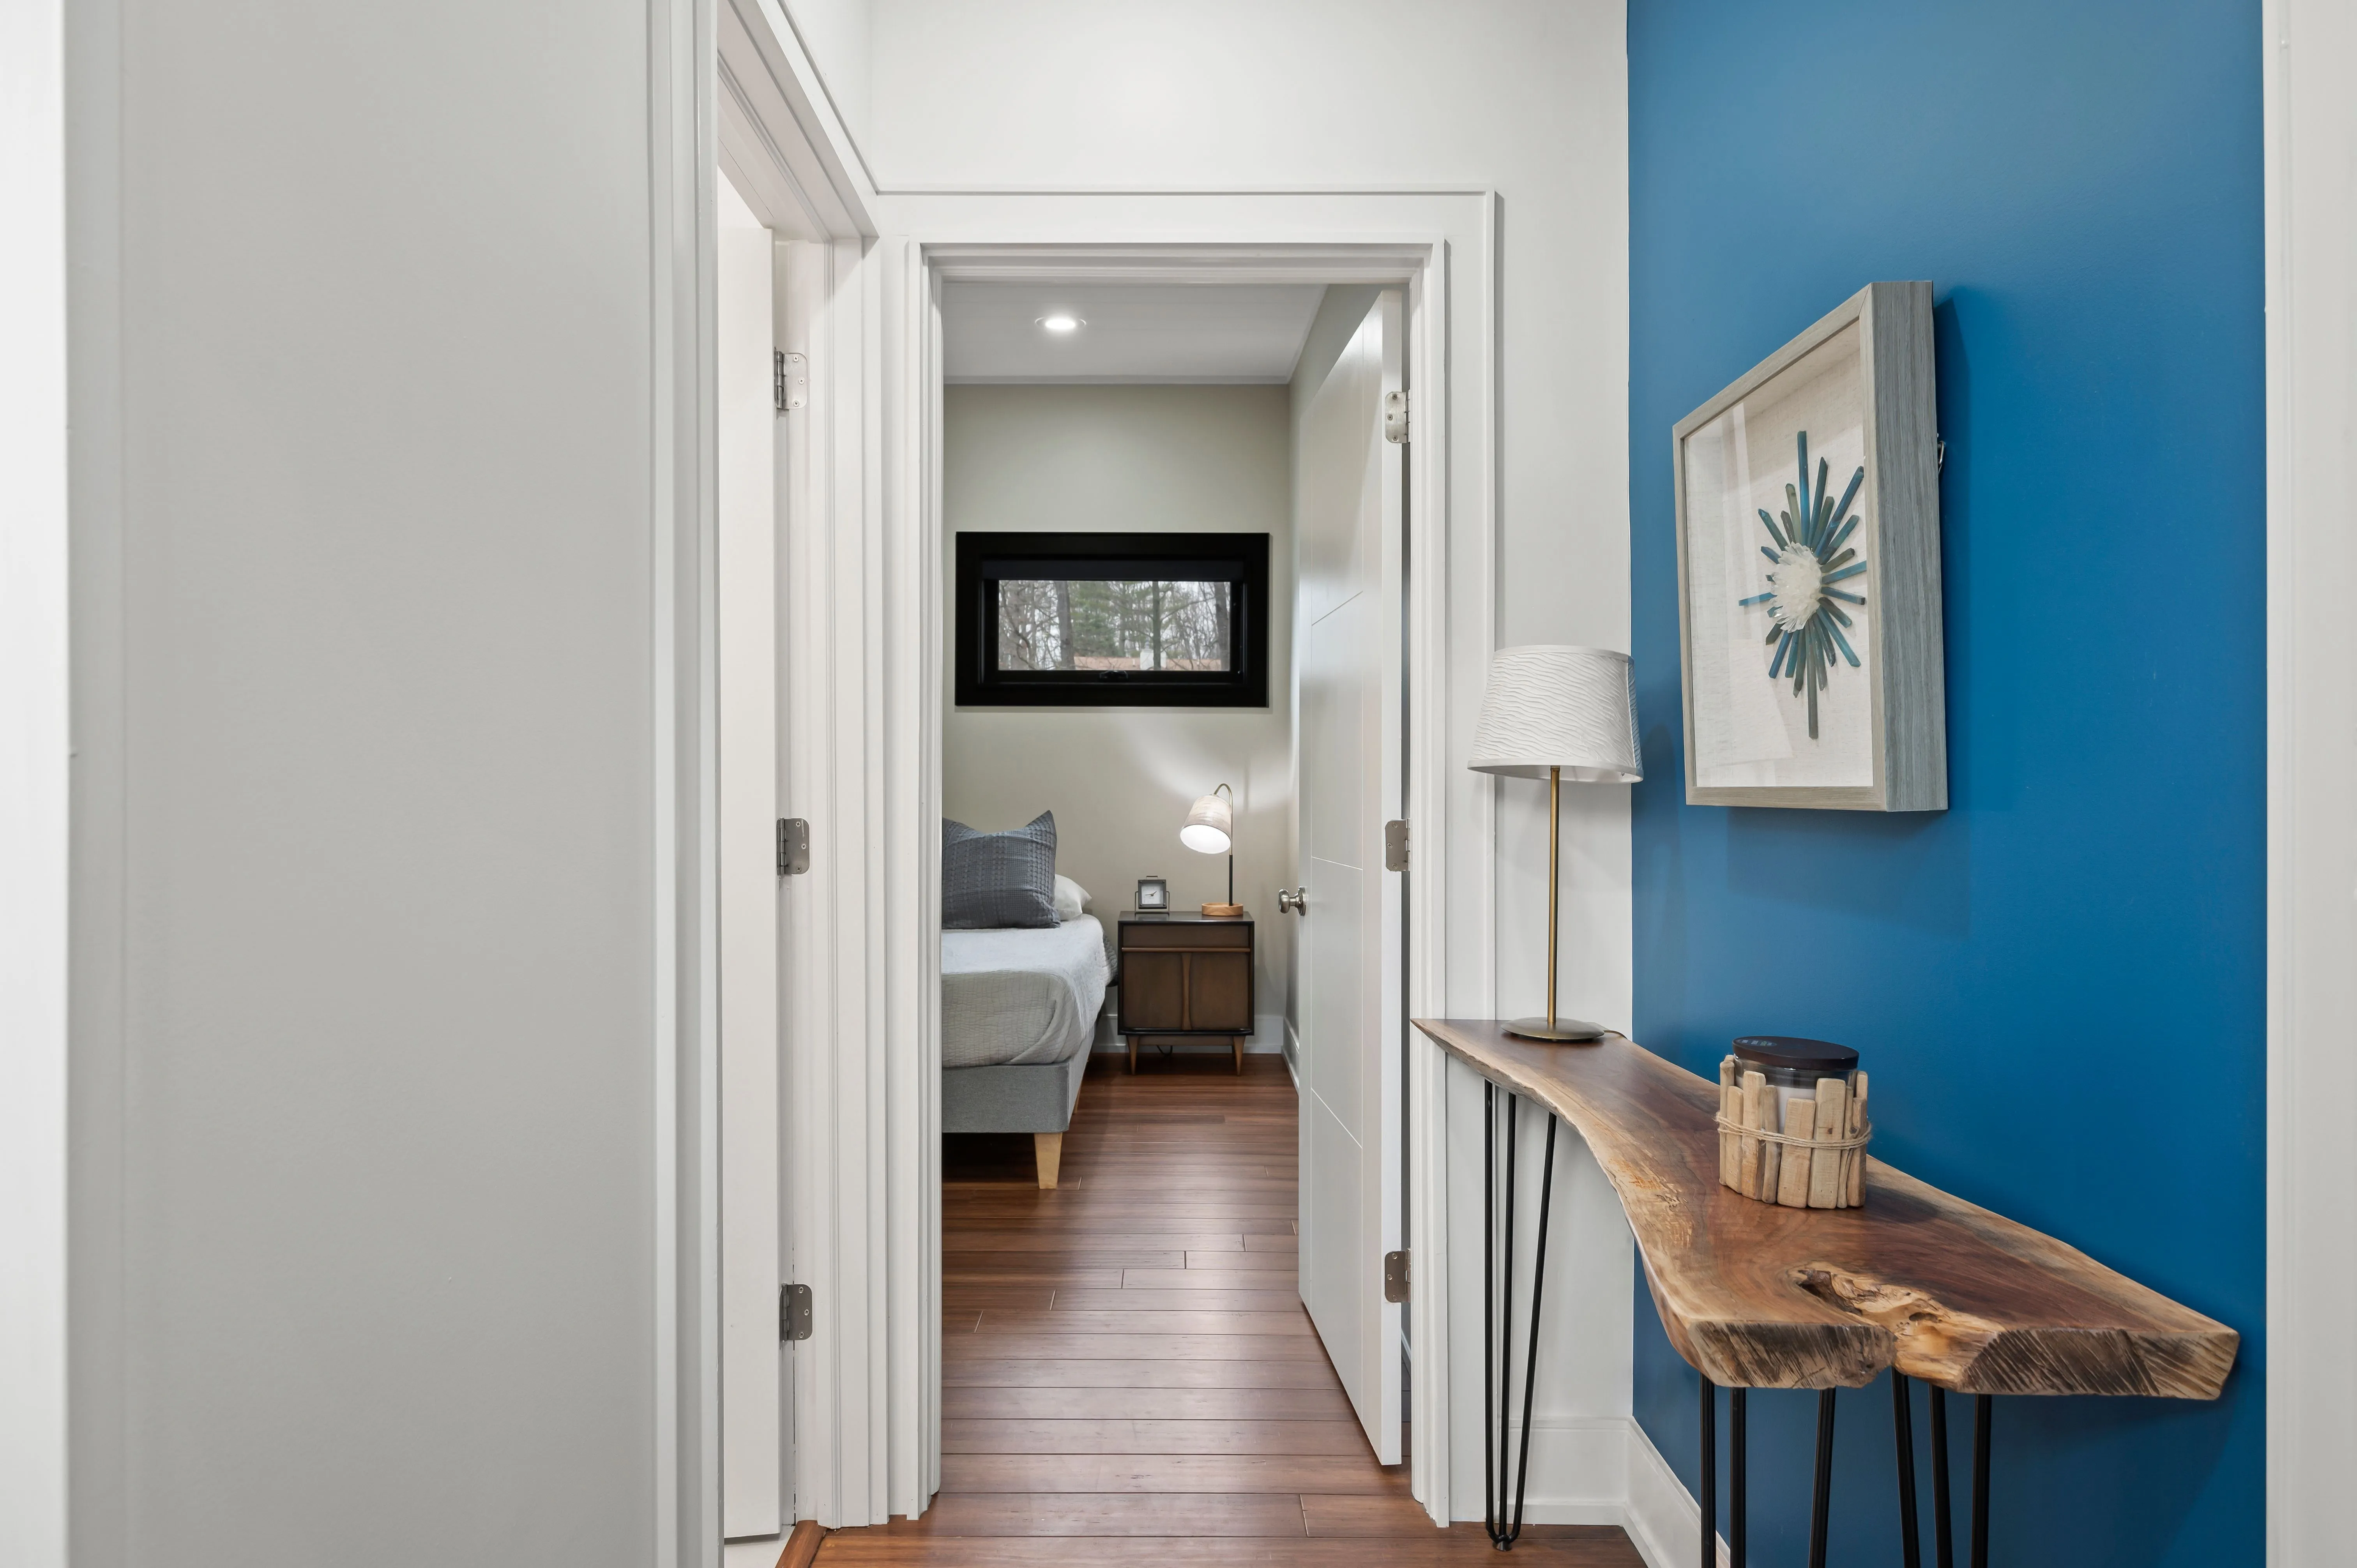 Bright hallway with contrasting blue and white walls, hardwood floors, and decorative table with plants.